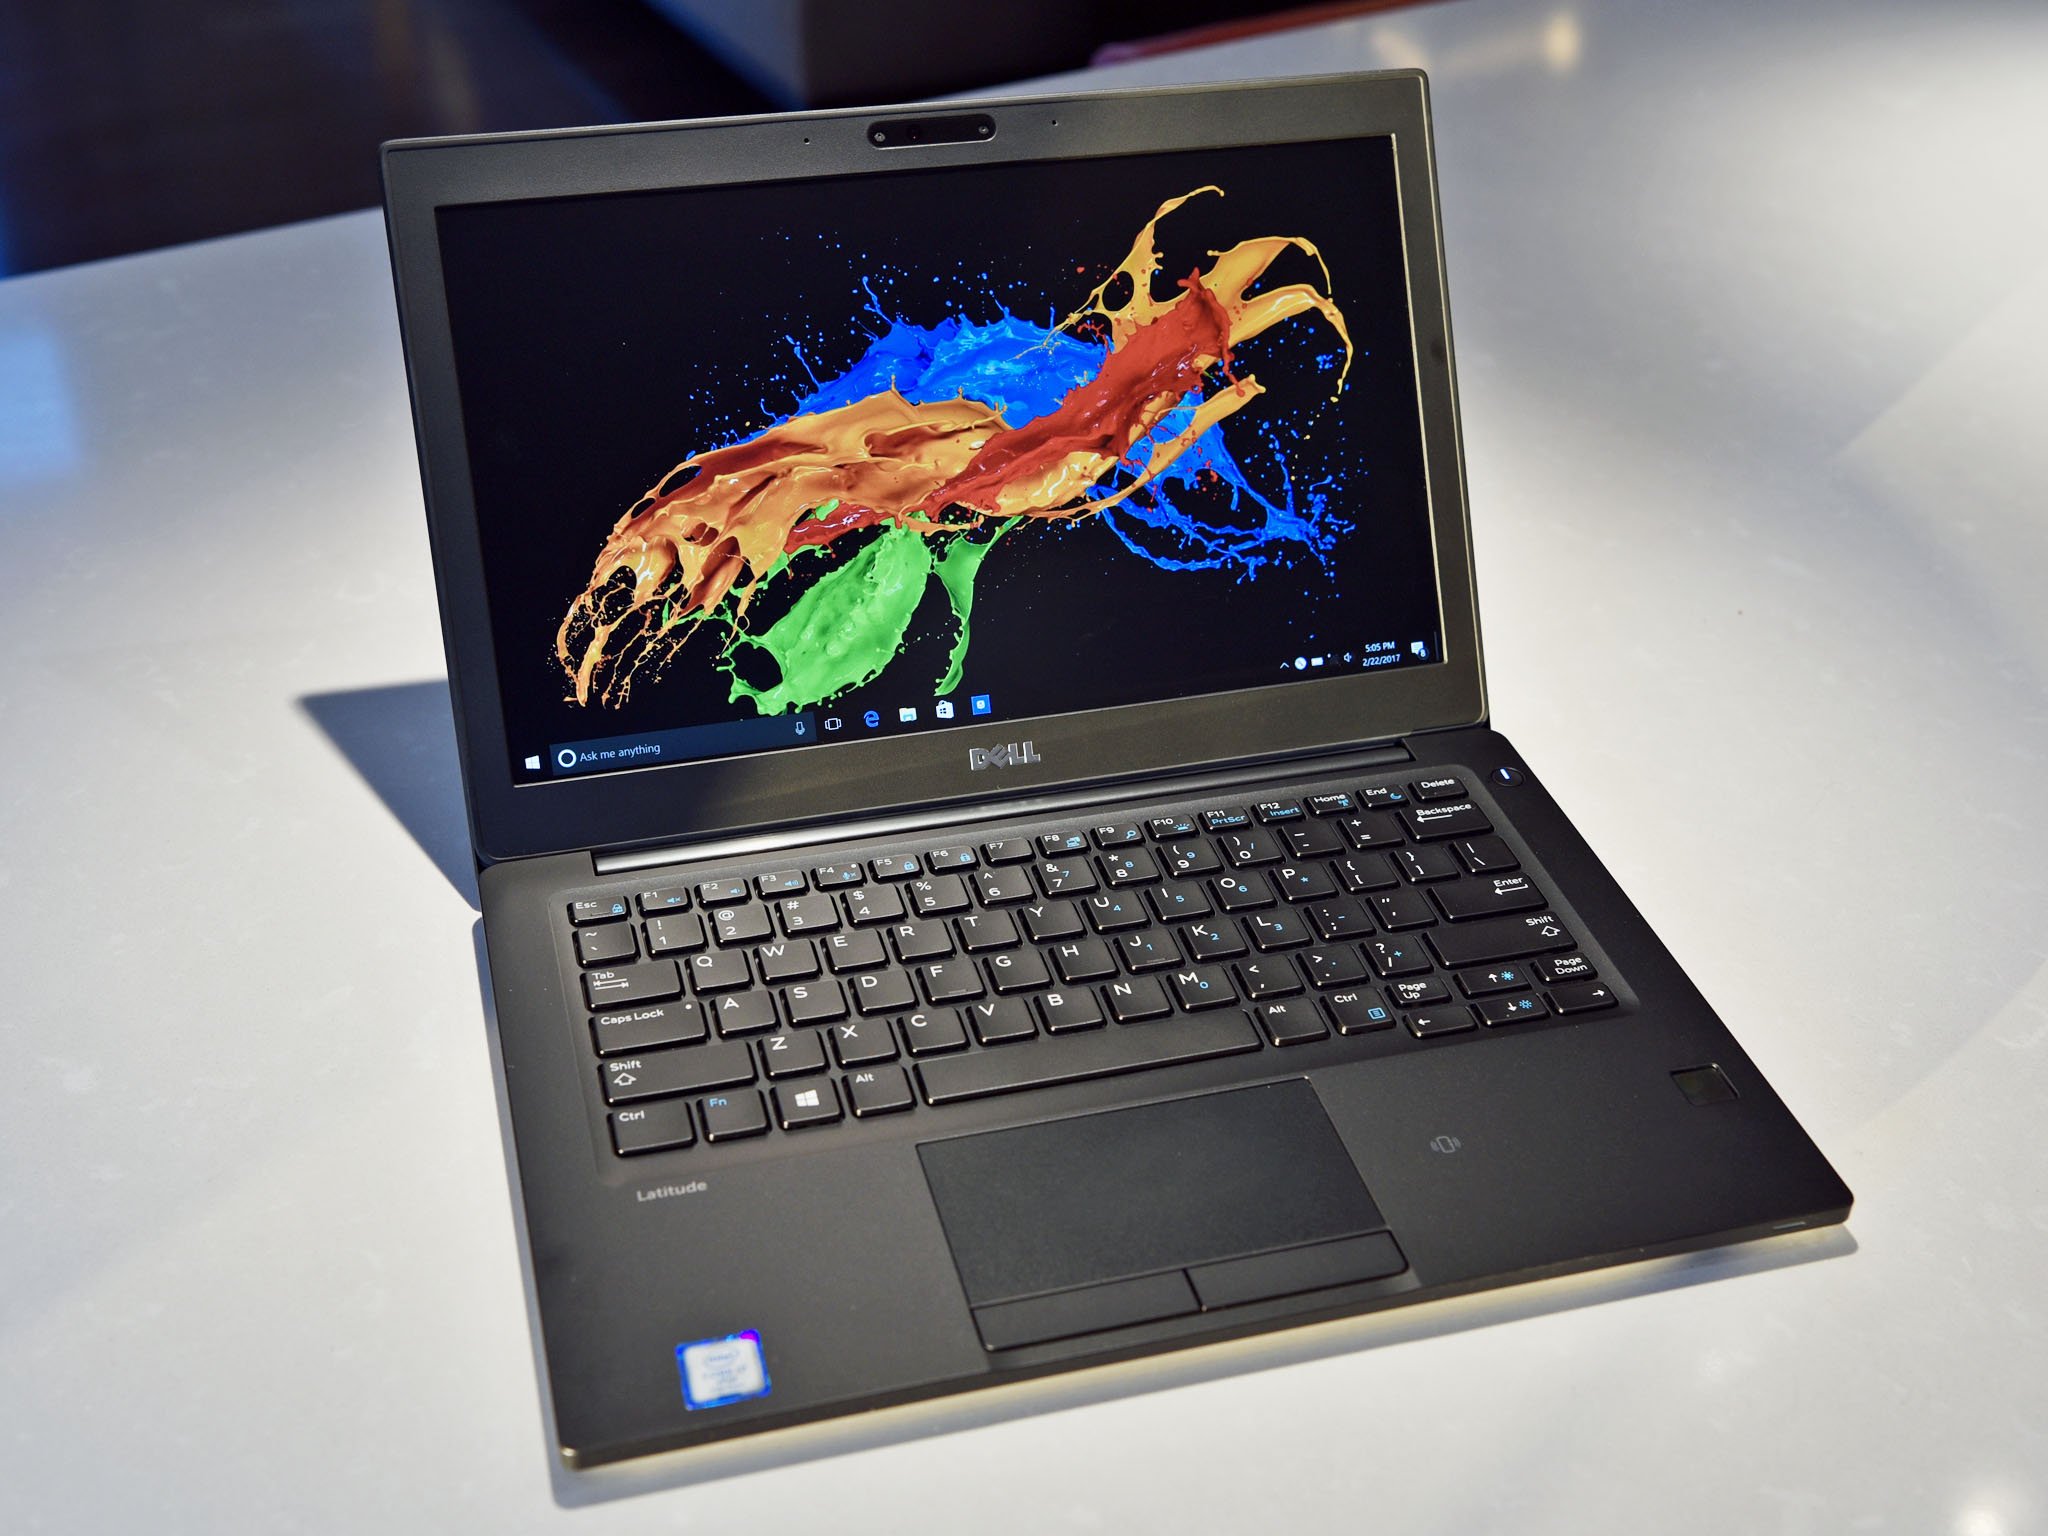 Dell Latitude 14 3420 review - some configurations are really good